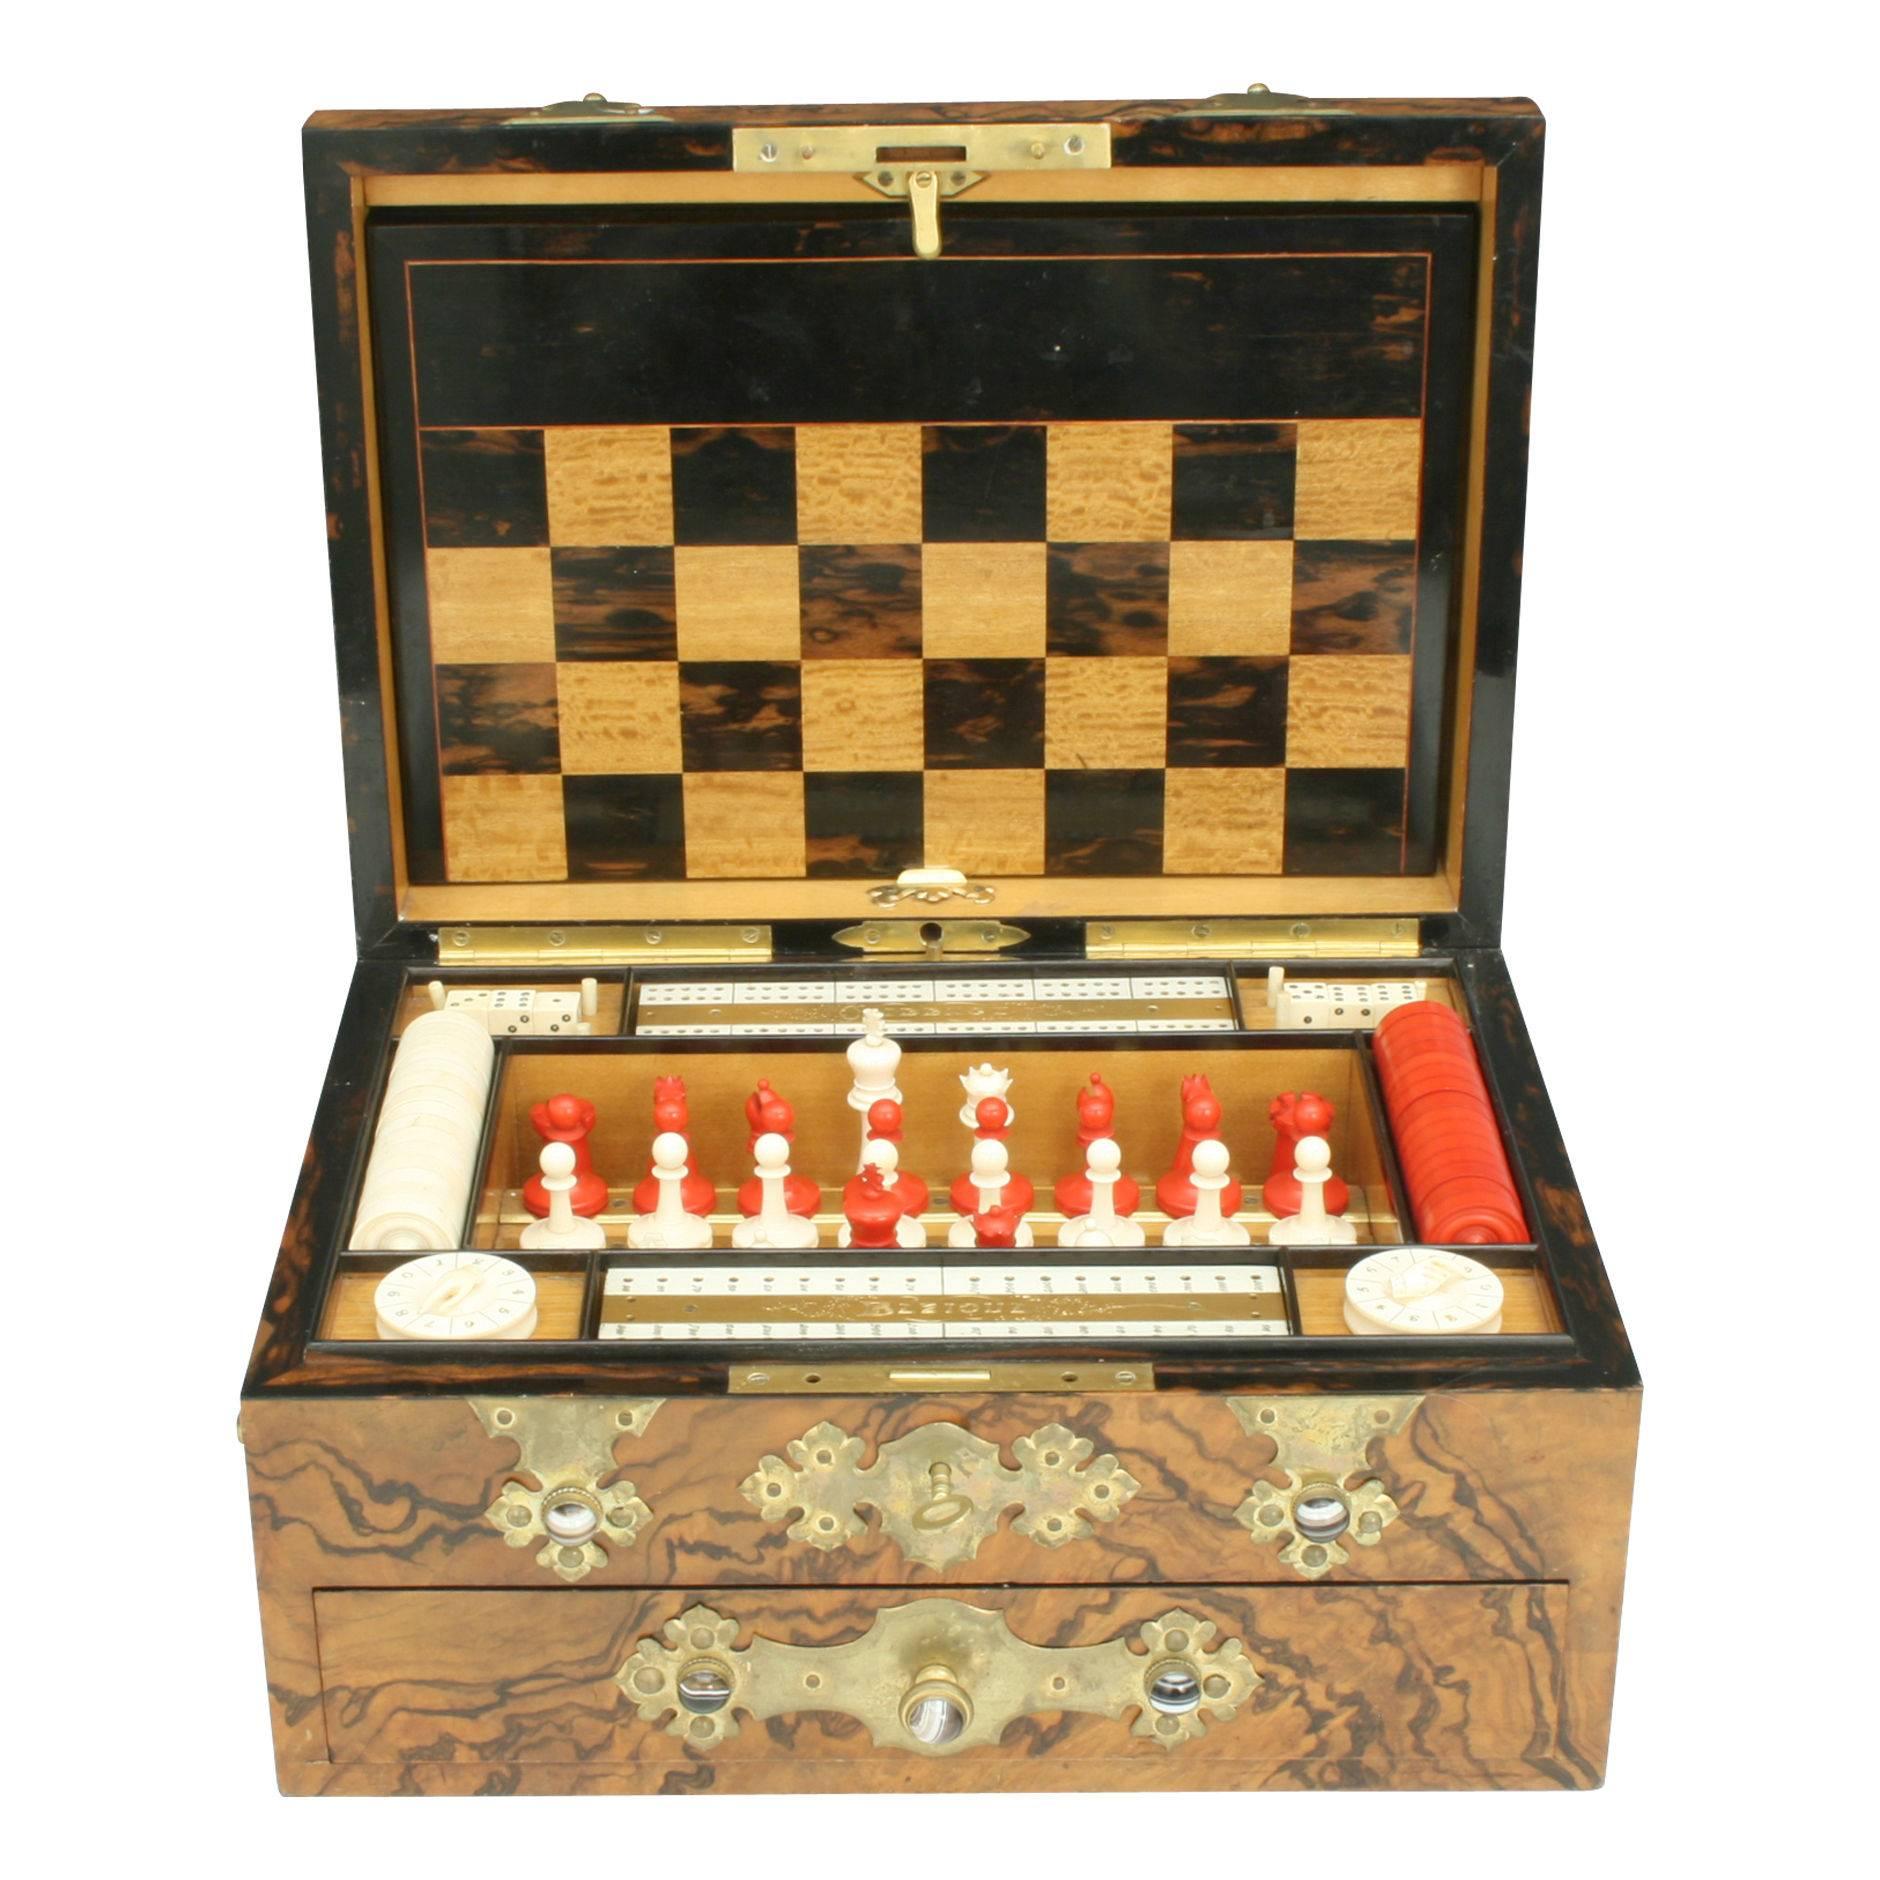 Victorian Games Compendium.
A fabulous antique games compendium made with the most beautiful rich walnut, satin wood, ebony and rose wood, decorated with gilt work encrusted with marbles. The compendium consists of chess, backgammon, draughts,